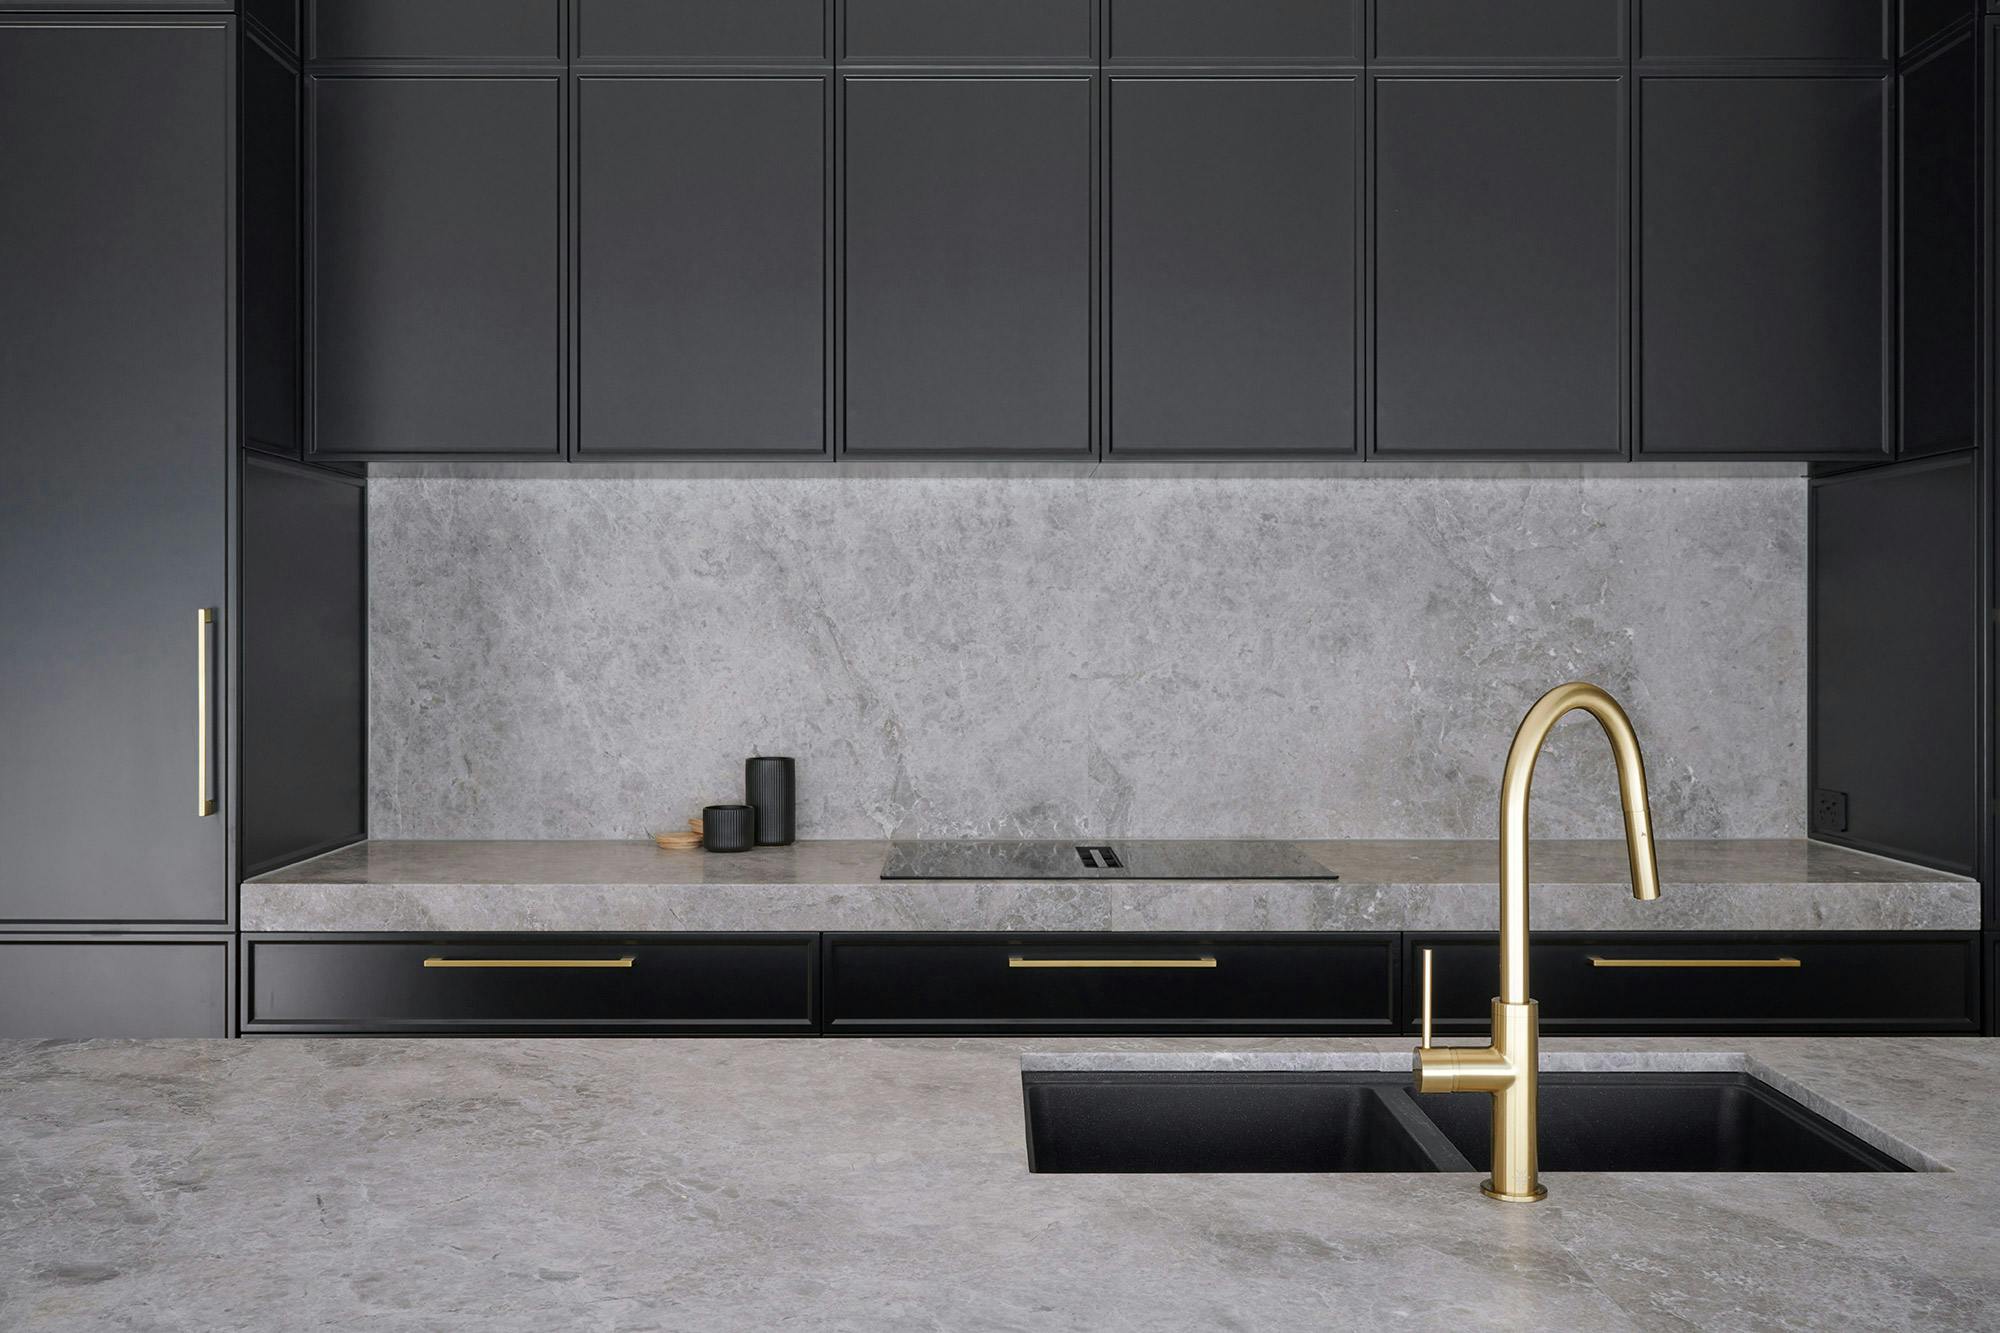 Imagem número 36 da actual secção de The sophisticated and exclusive Scalea Equinox stone is a real eye-catcher in this opulent kitchen with dramatic tones da Cosentino Portugal